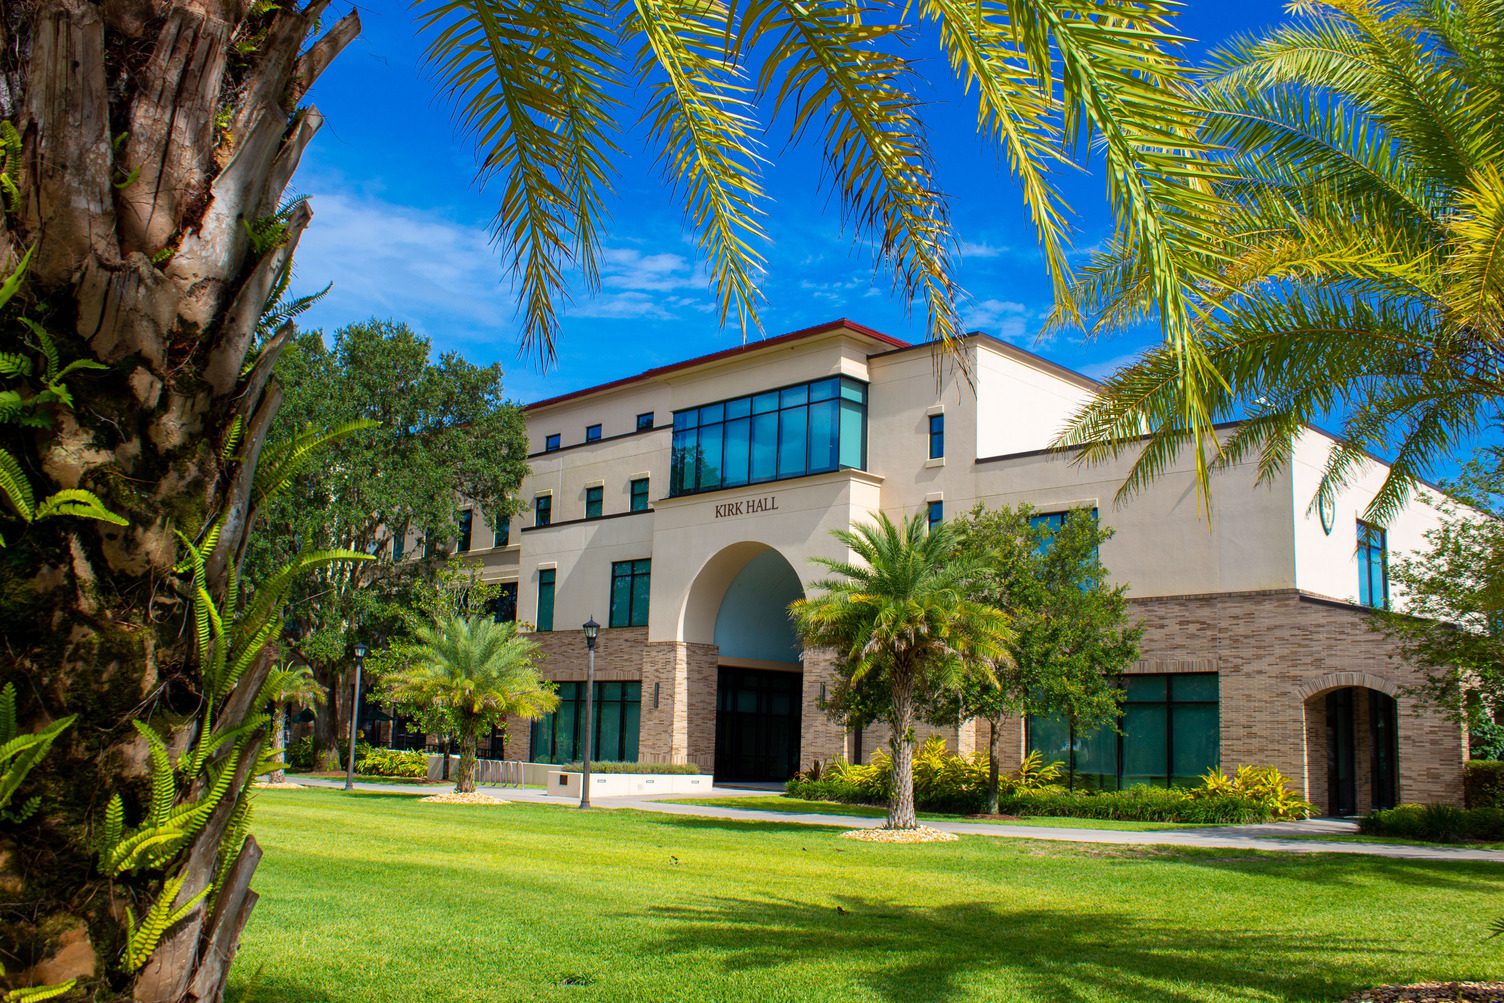 Kirk Hall is one of the academic buildings at Saint Leo University’s campus in St. Leo, FL, north of Tampa. New and prospective students and families may tour the campus on Super Saturday, July 17.